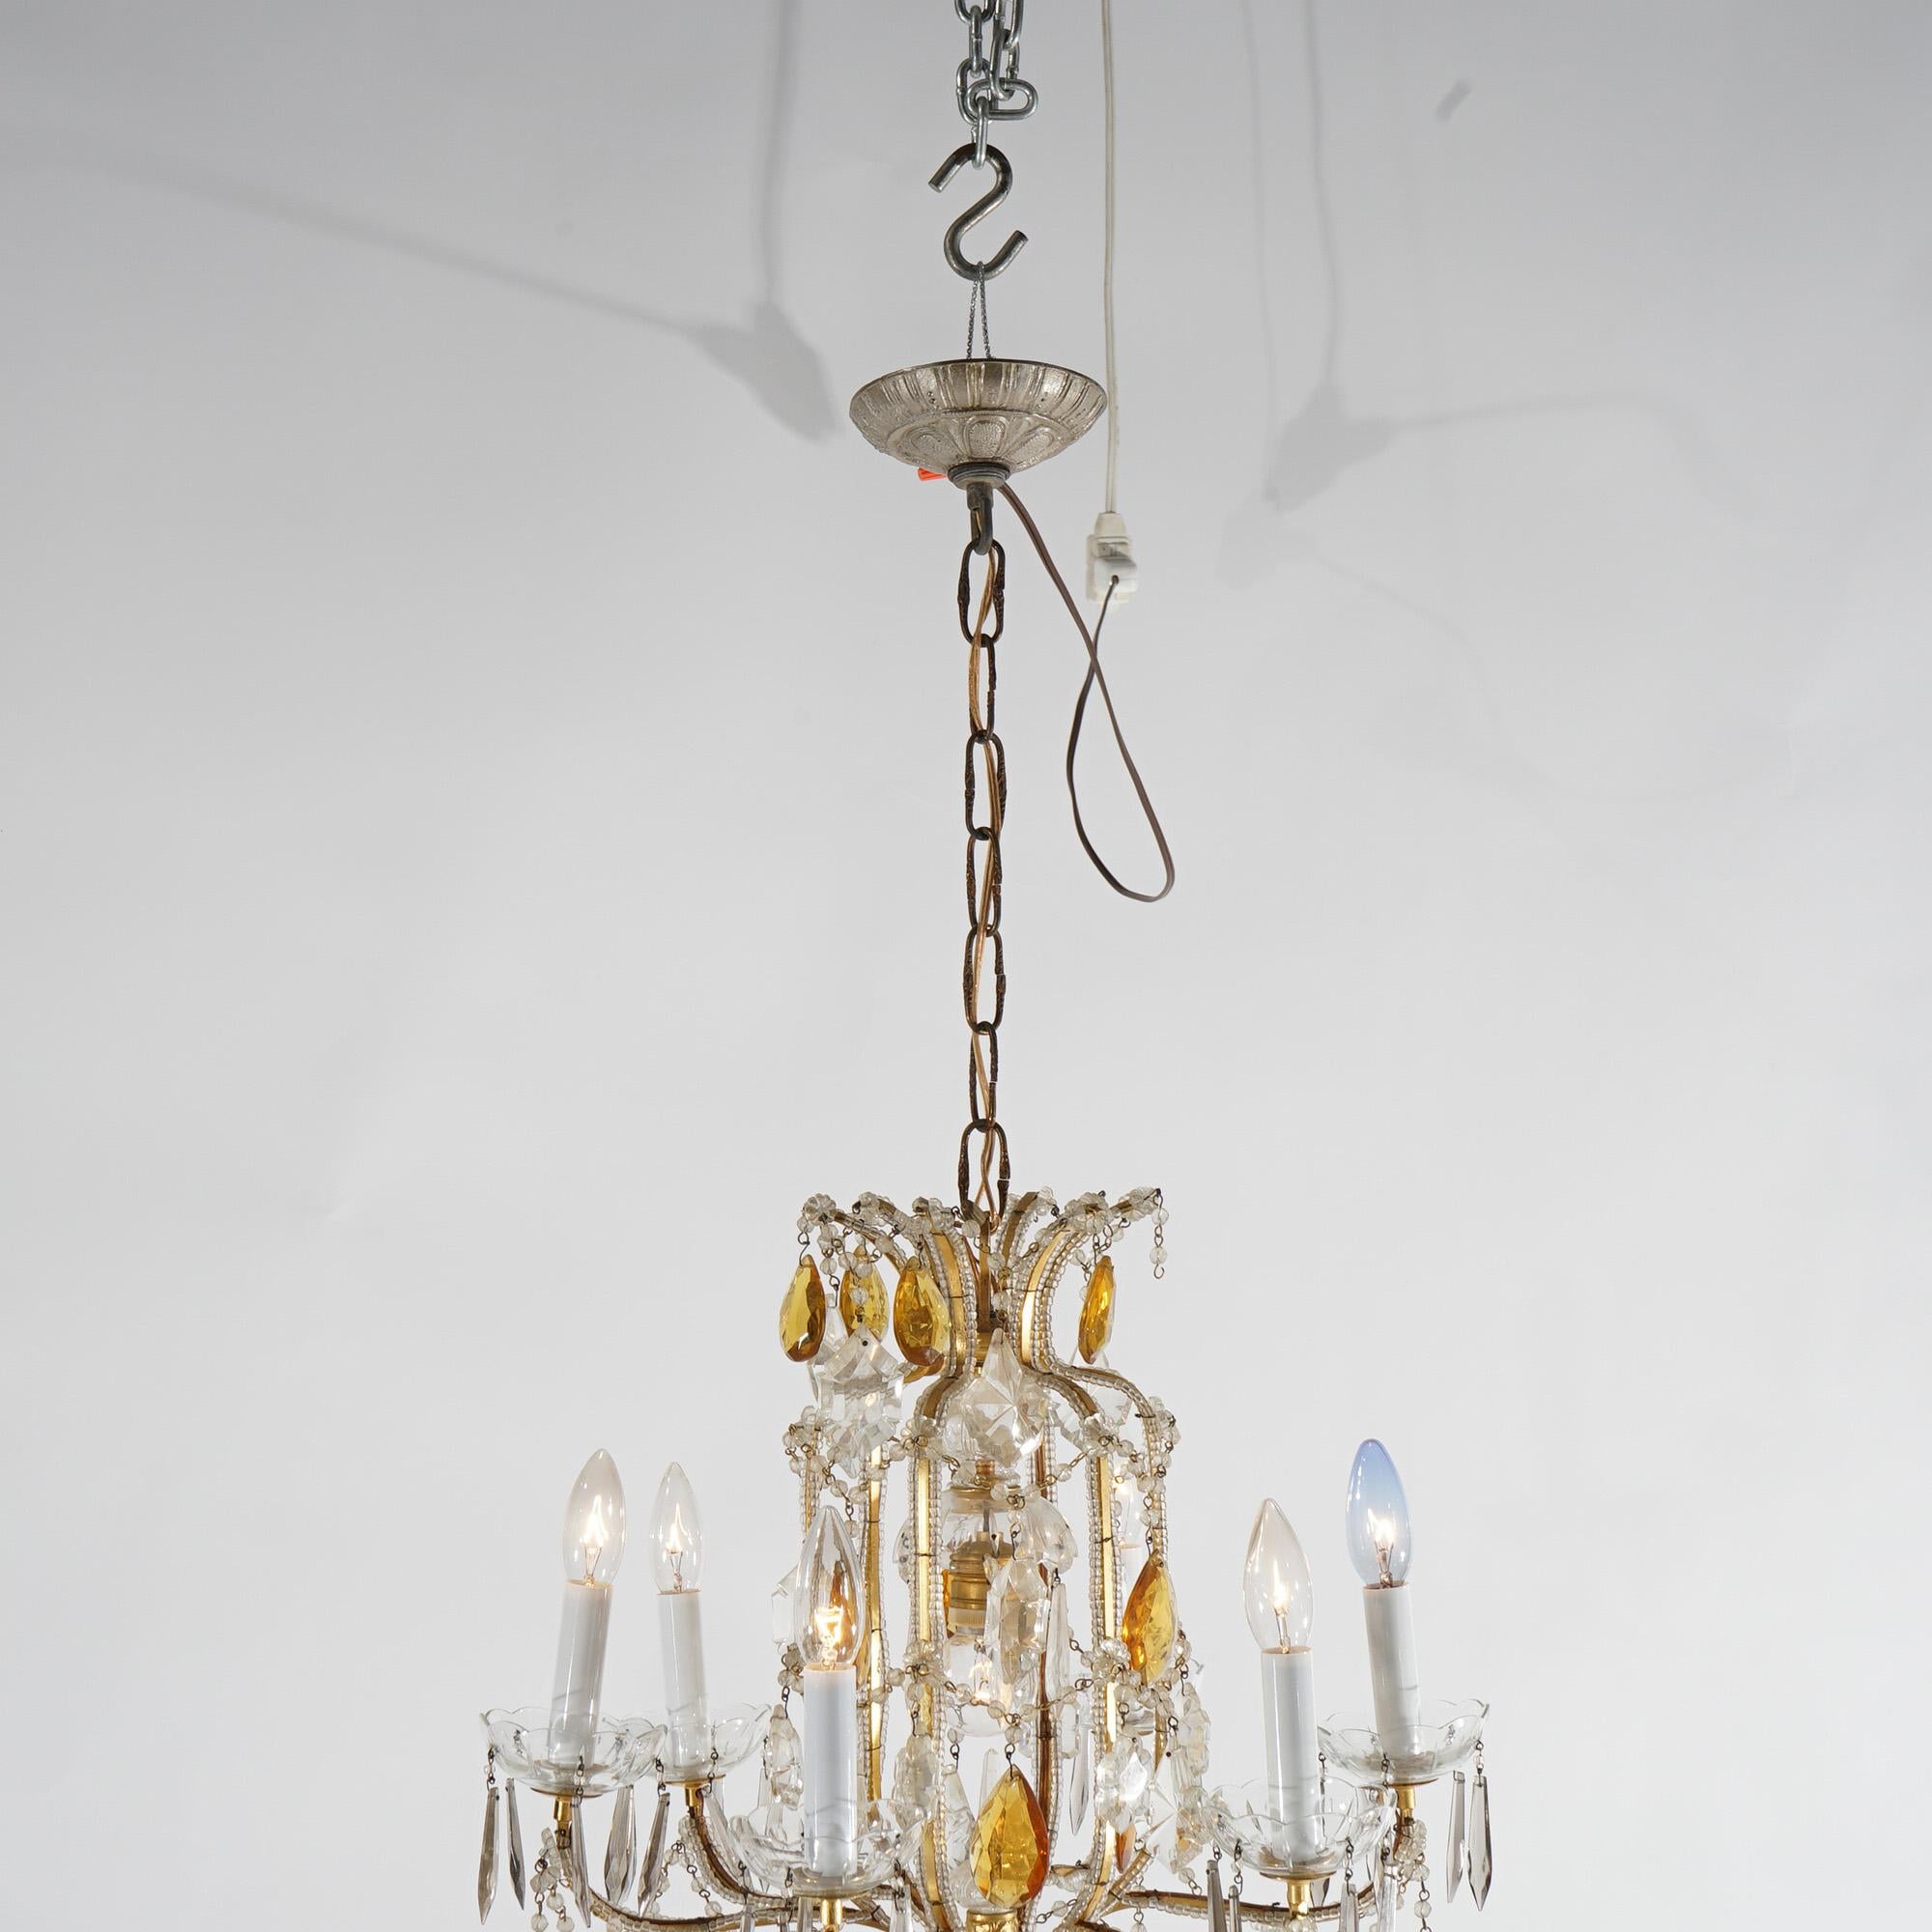 American French Louis. XIV Style Seven-Light Crystal Chandelier with Amber Prisms, 20th C For Sale